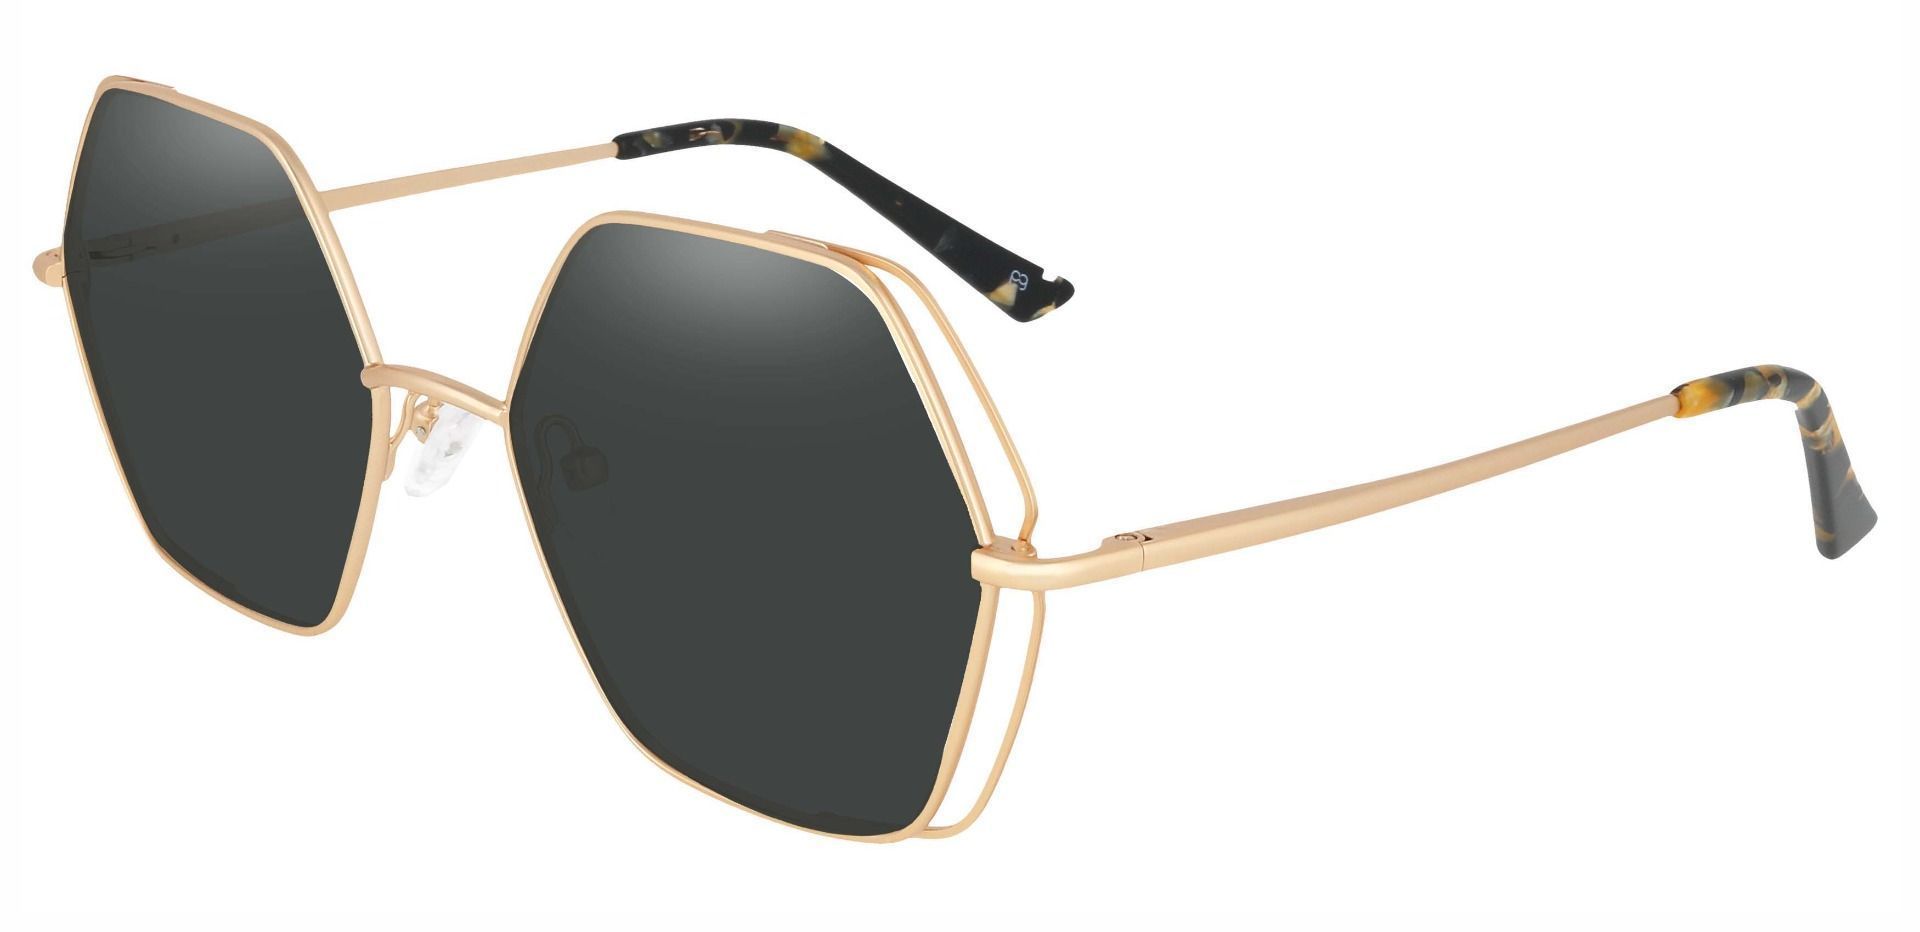 Hawley Geometric Non-Rx Sunglasses - Gold Frame With Gray Lenses